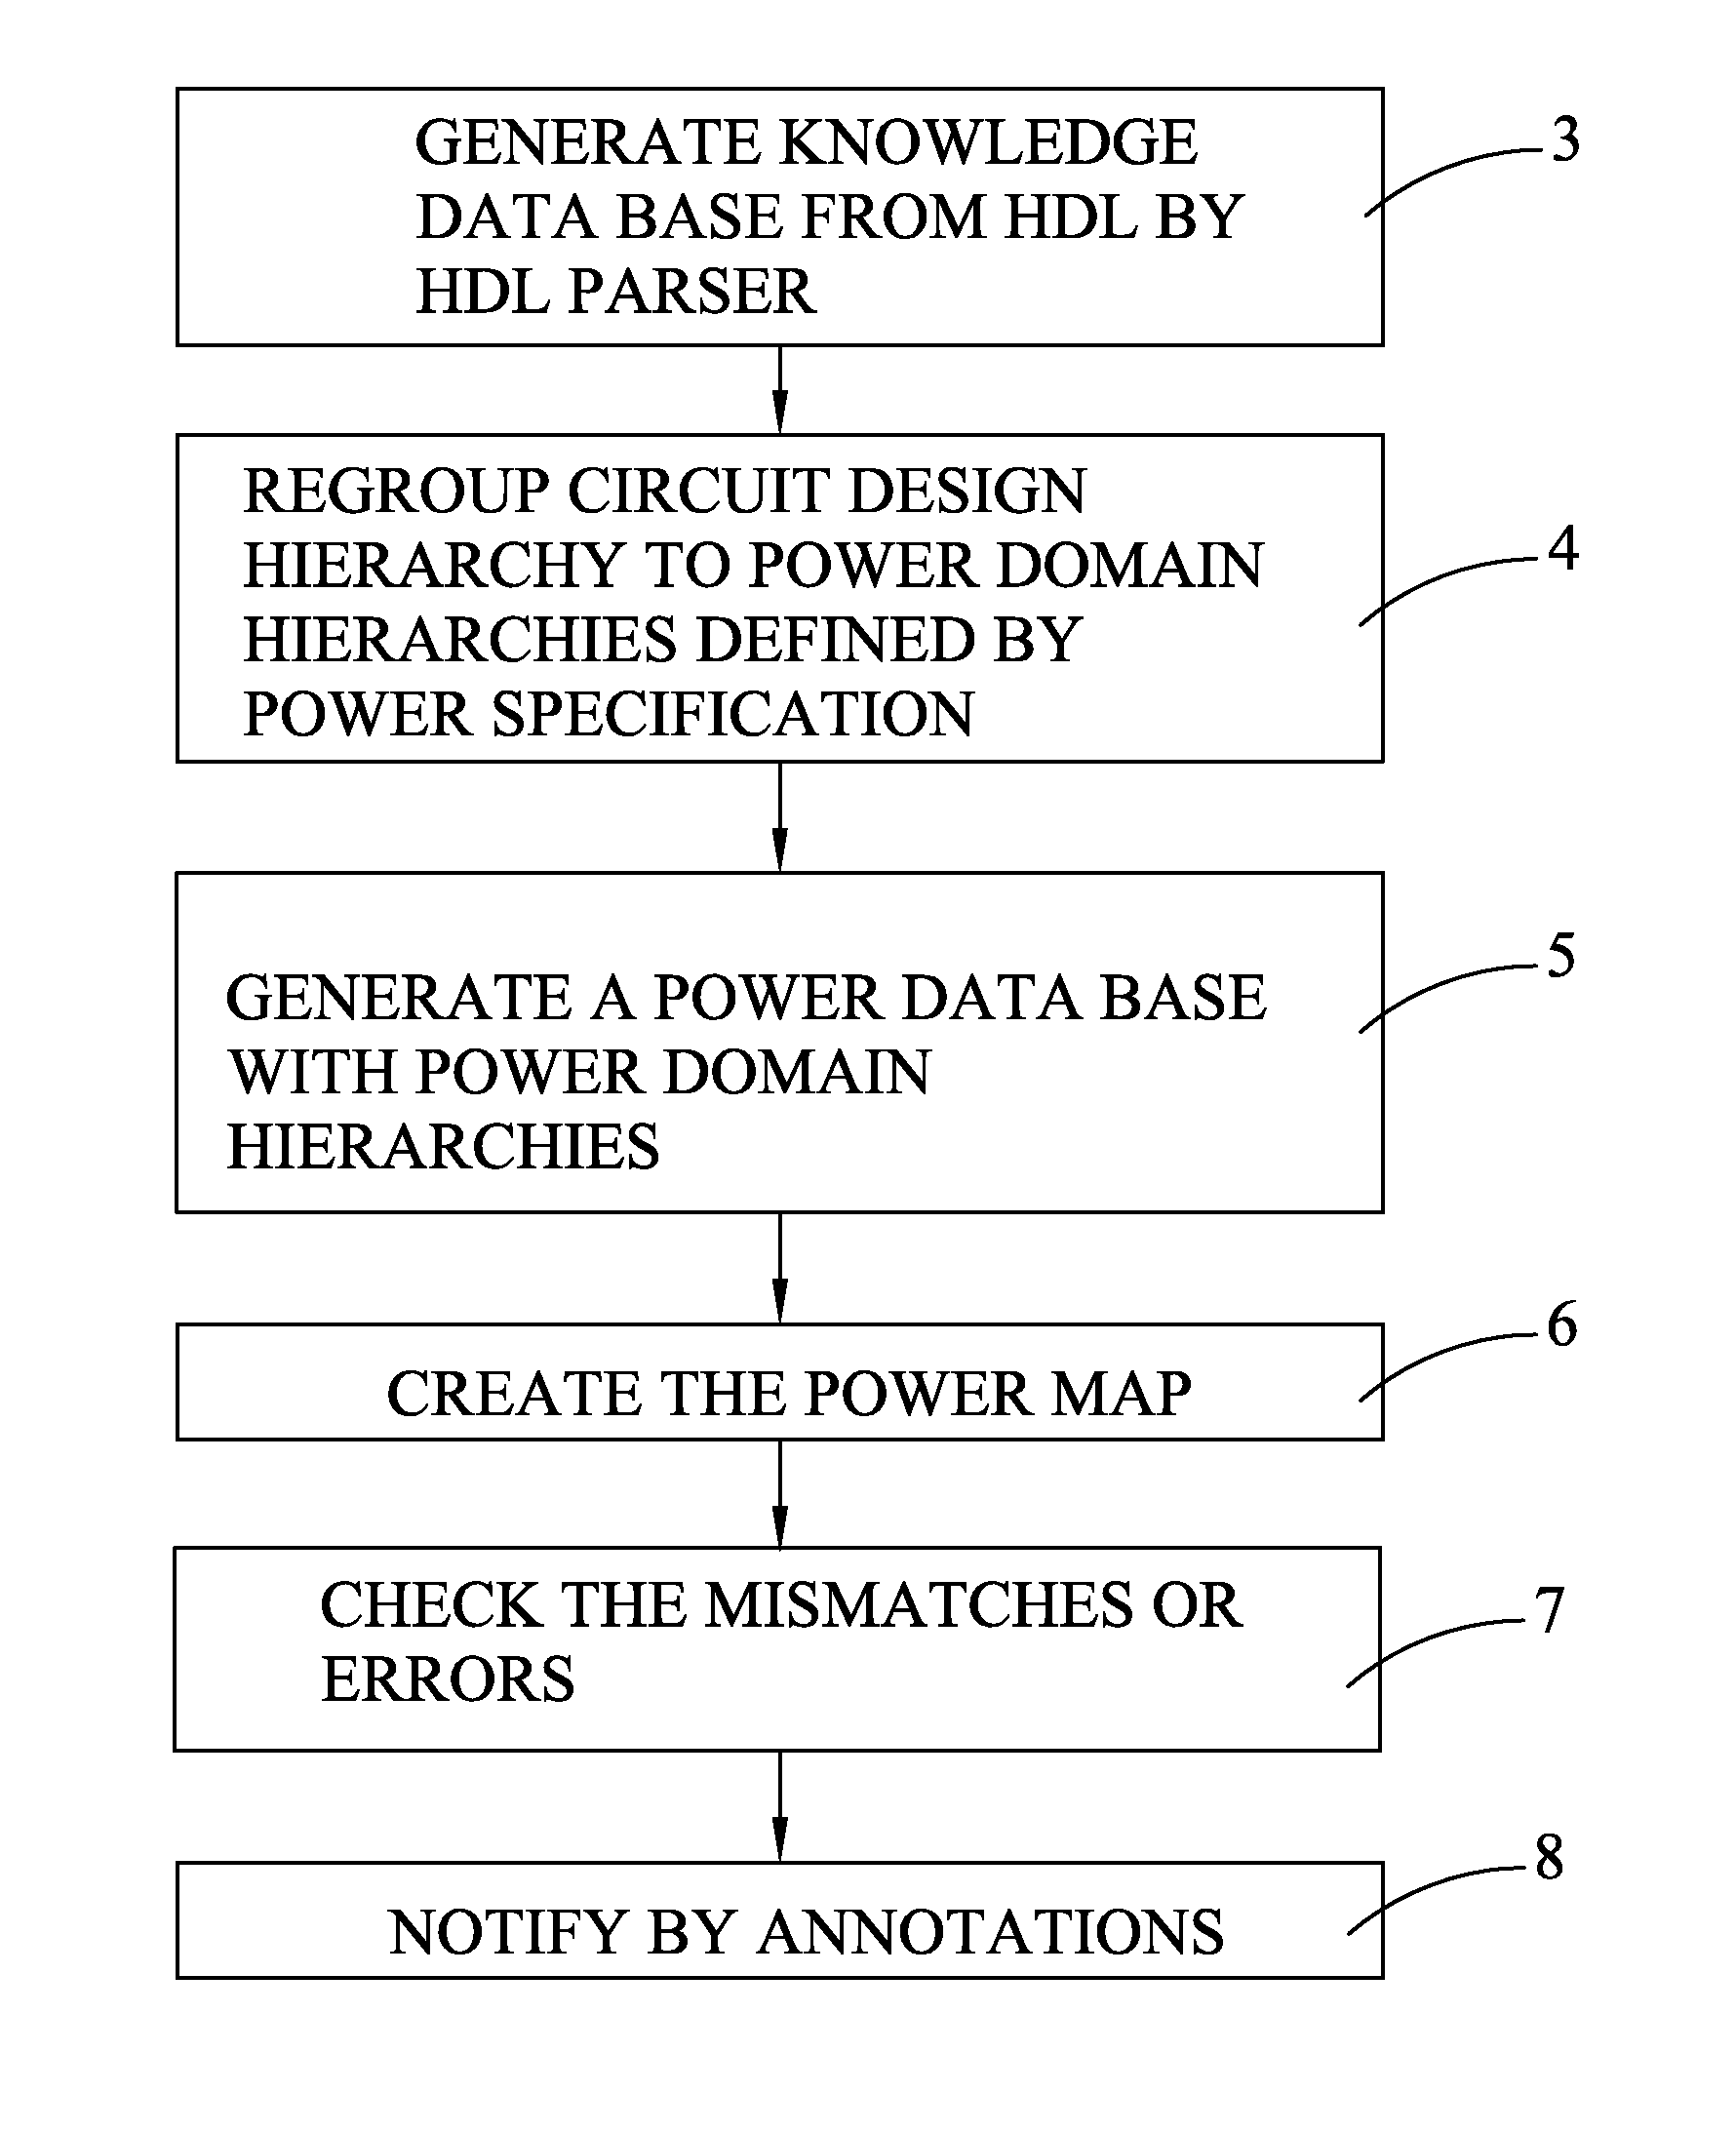 Hierarchial power map for low power design